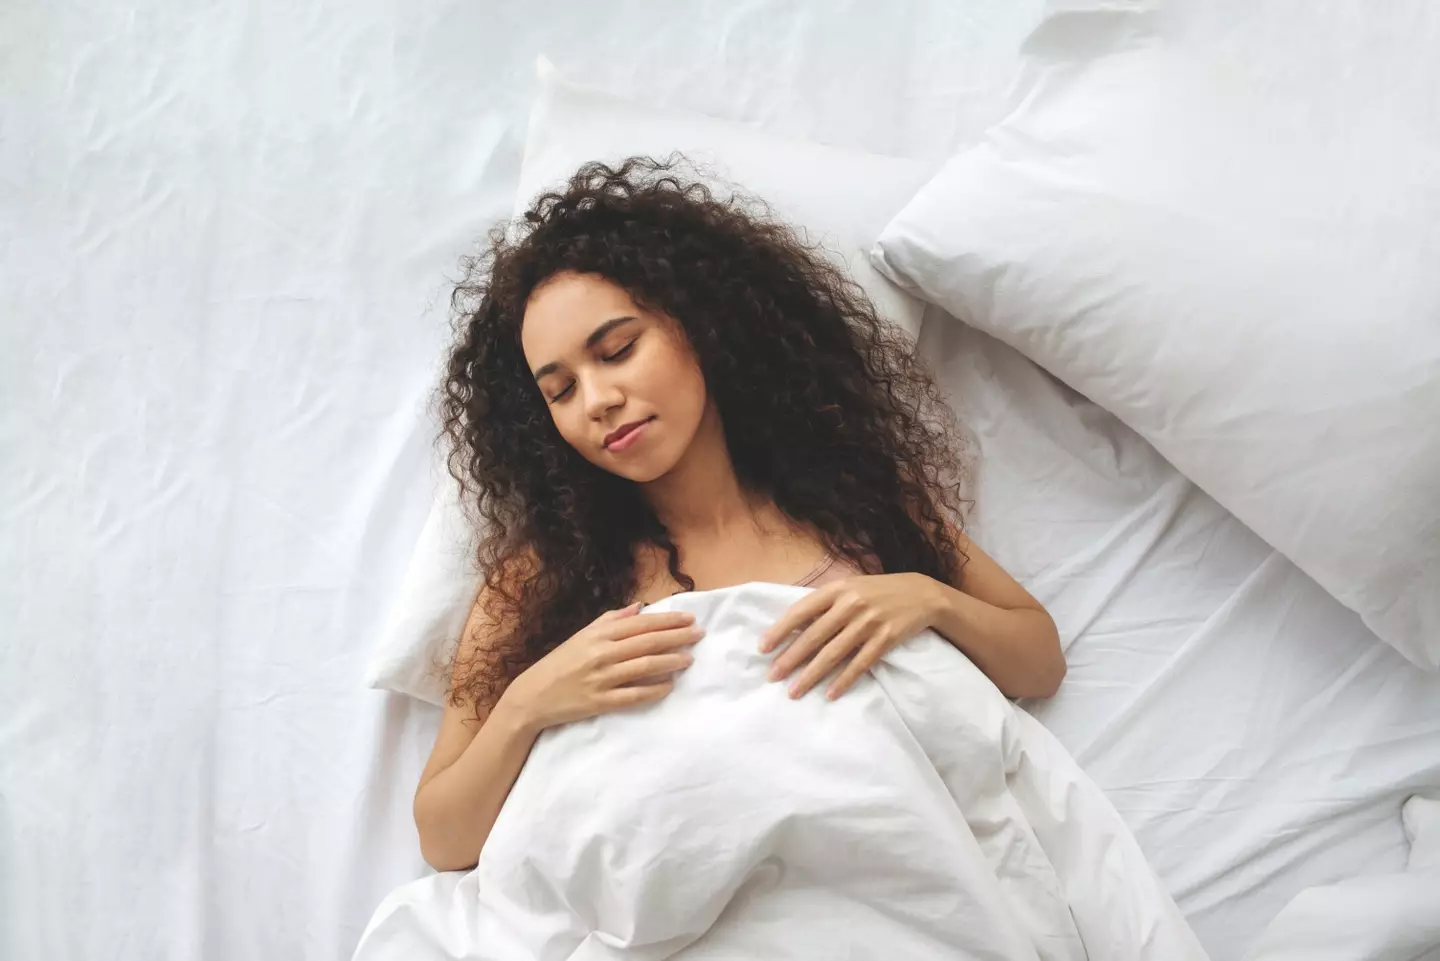 A host of other sleep gurus explained that laying in, even on days off, could be preventing people from having the best sleep.